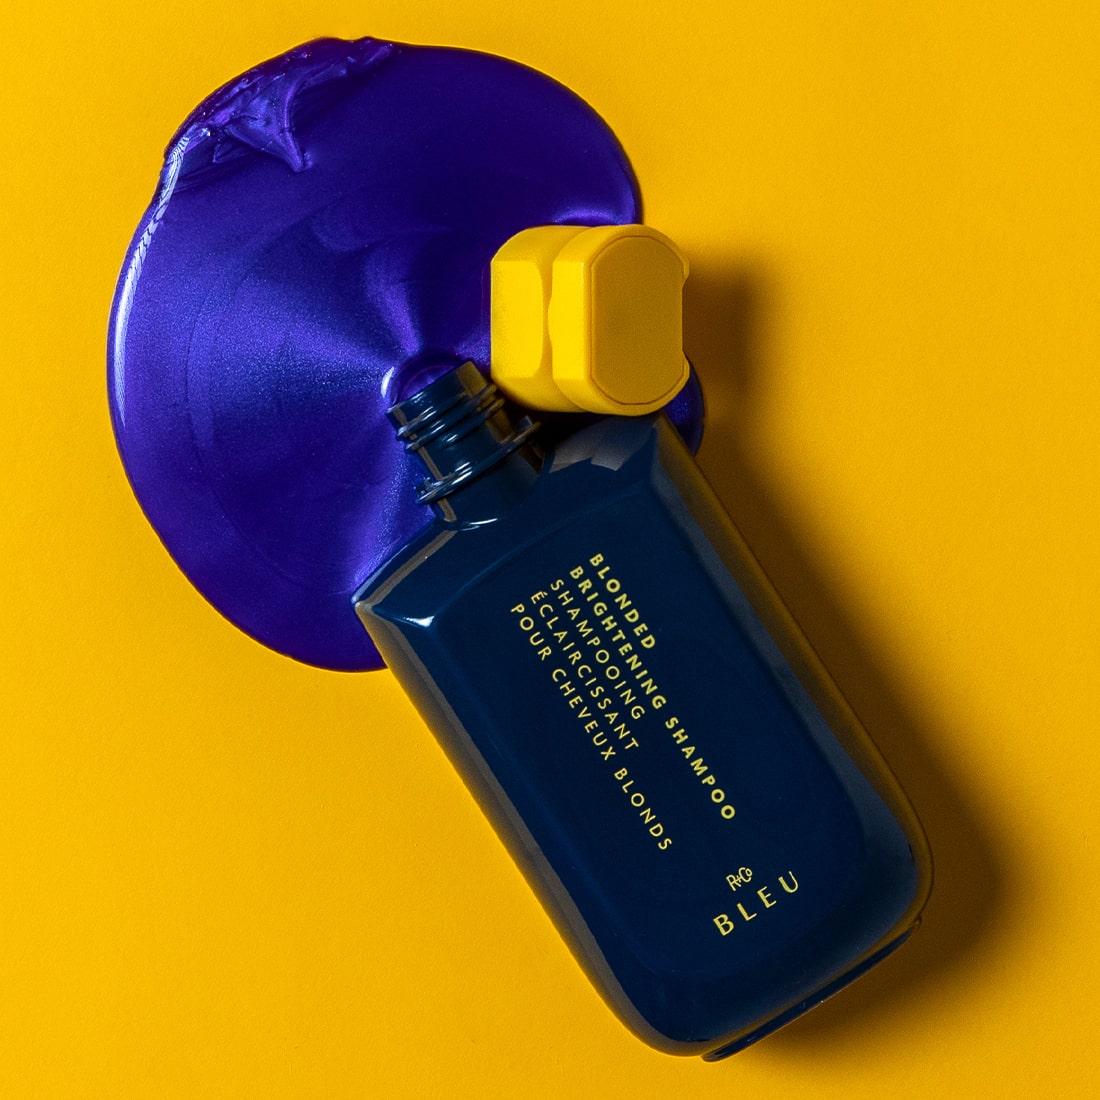 R+Co Blonded Brightening Shampoo - Product shown poured out